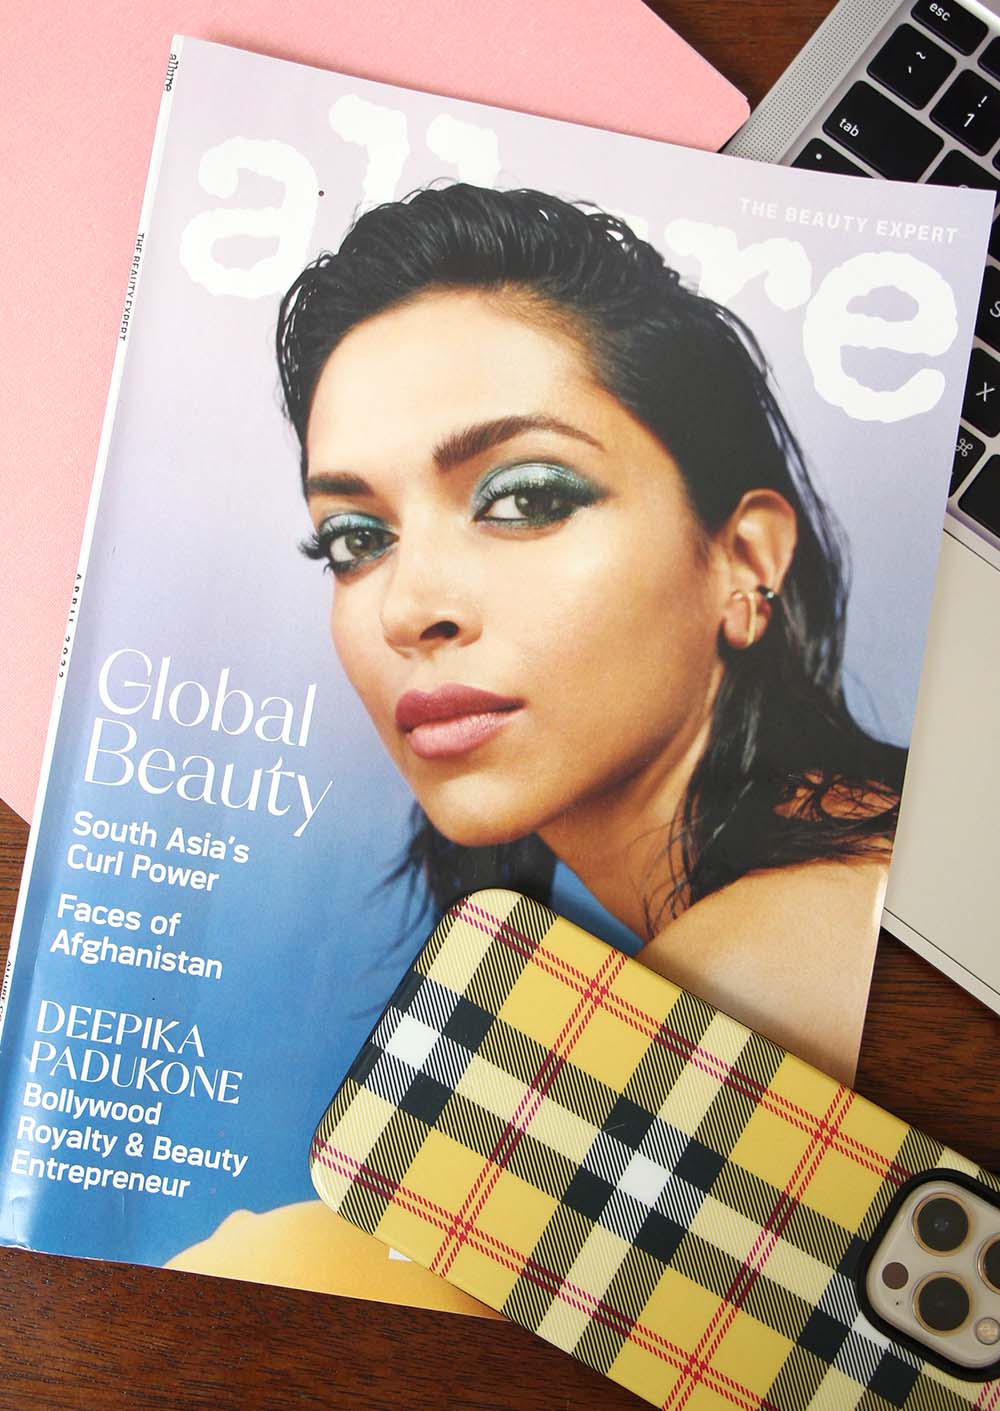 What Do You Think About Print Beauty Magazines Disappearing?